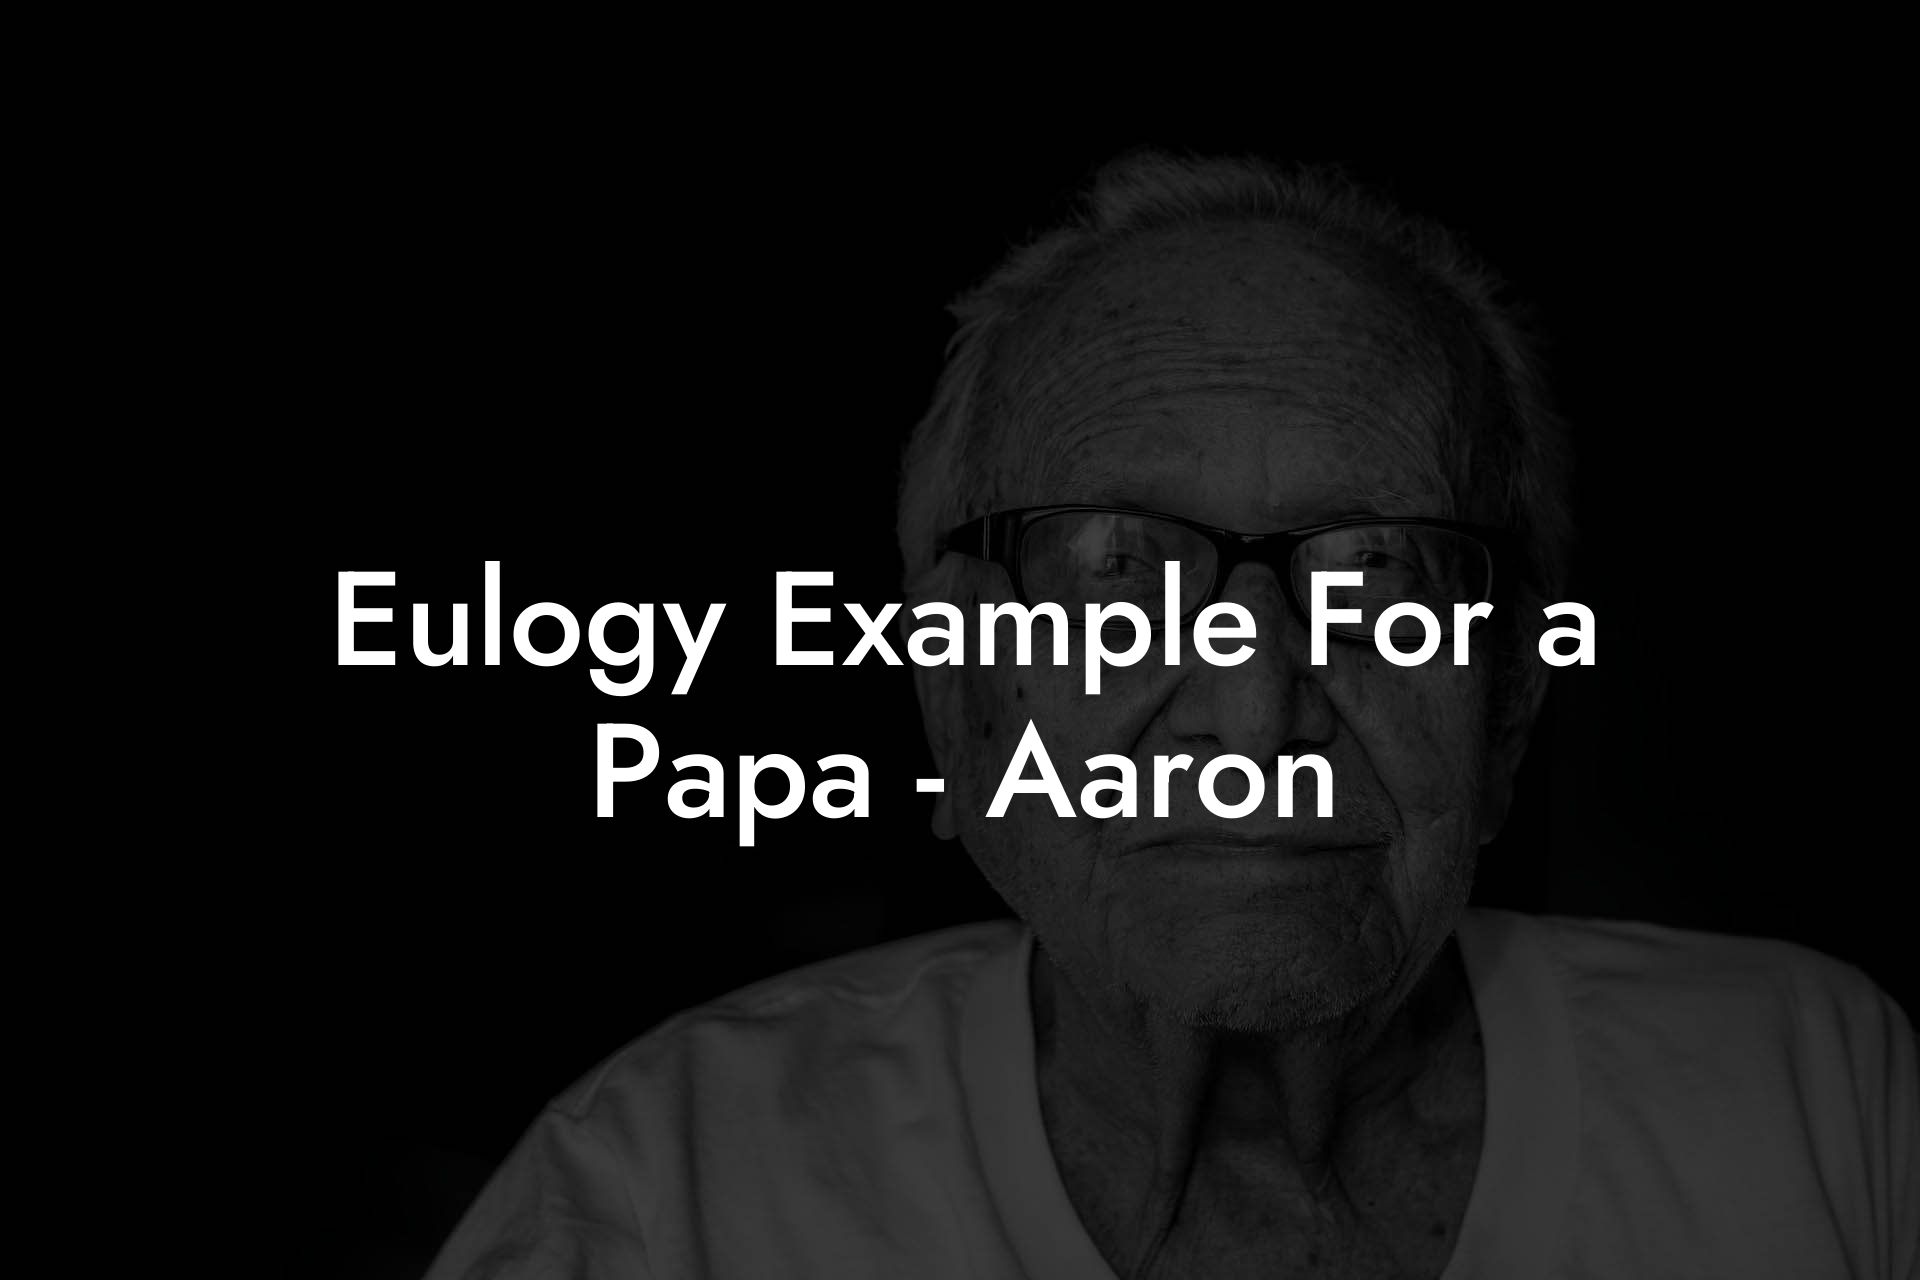 Eulogy Example For a Papa - Aaron